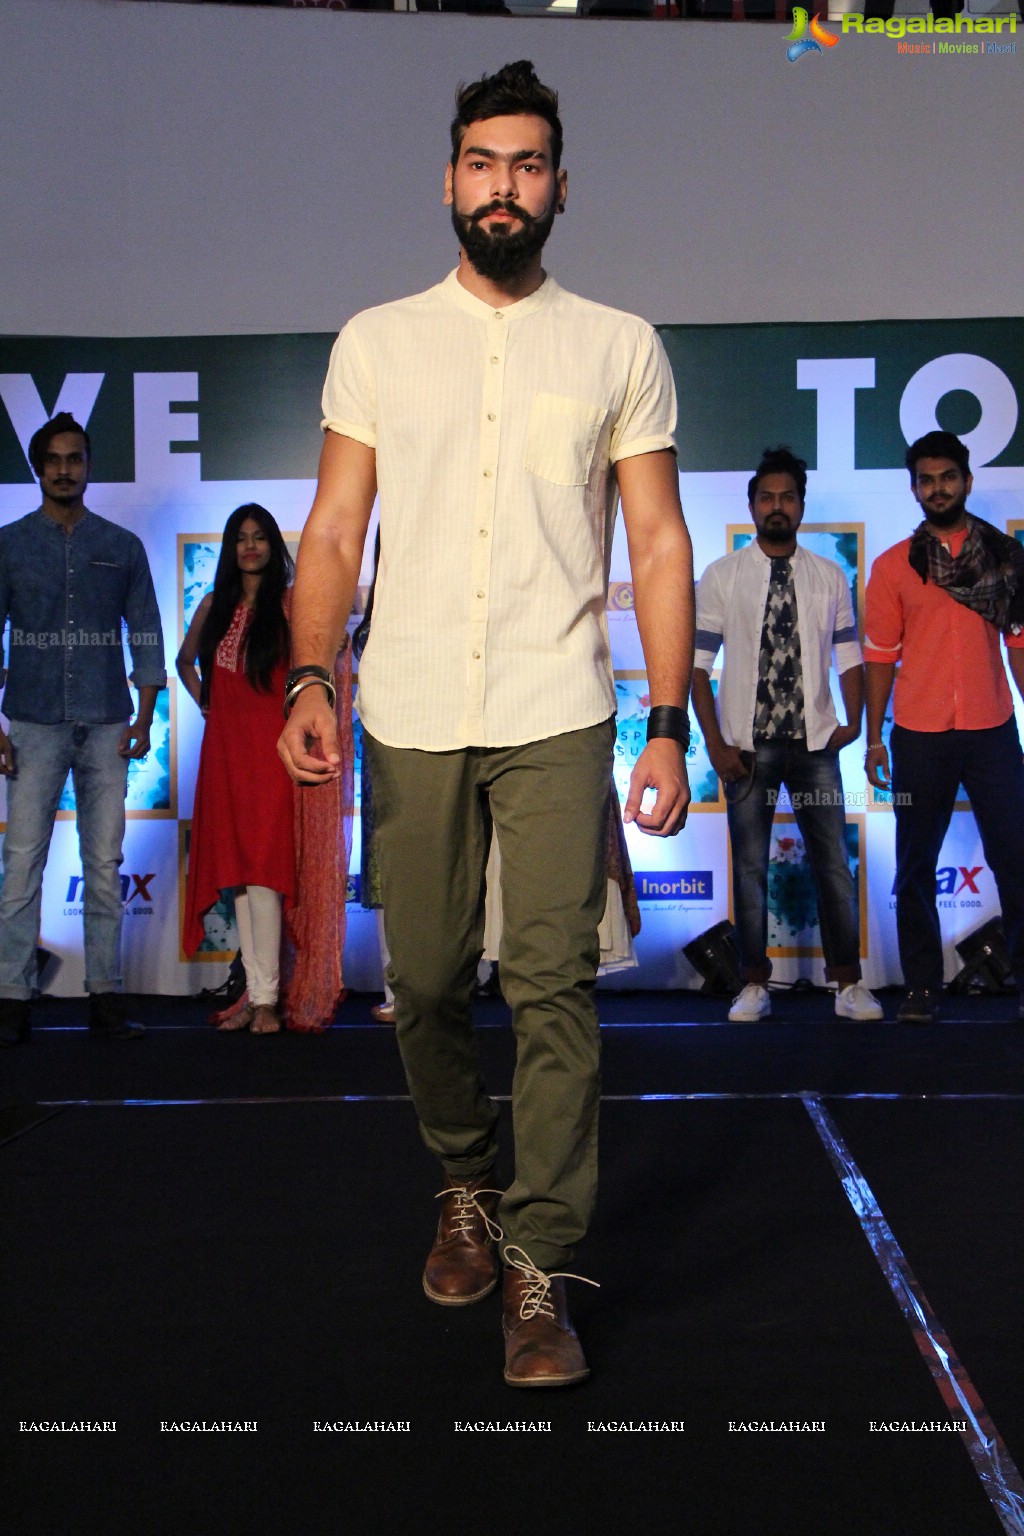 Max Fashion India Summer Collection 2016 Launch at Inorbit Mall, Hyderabad